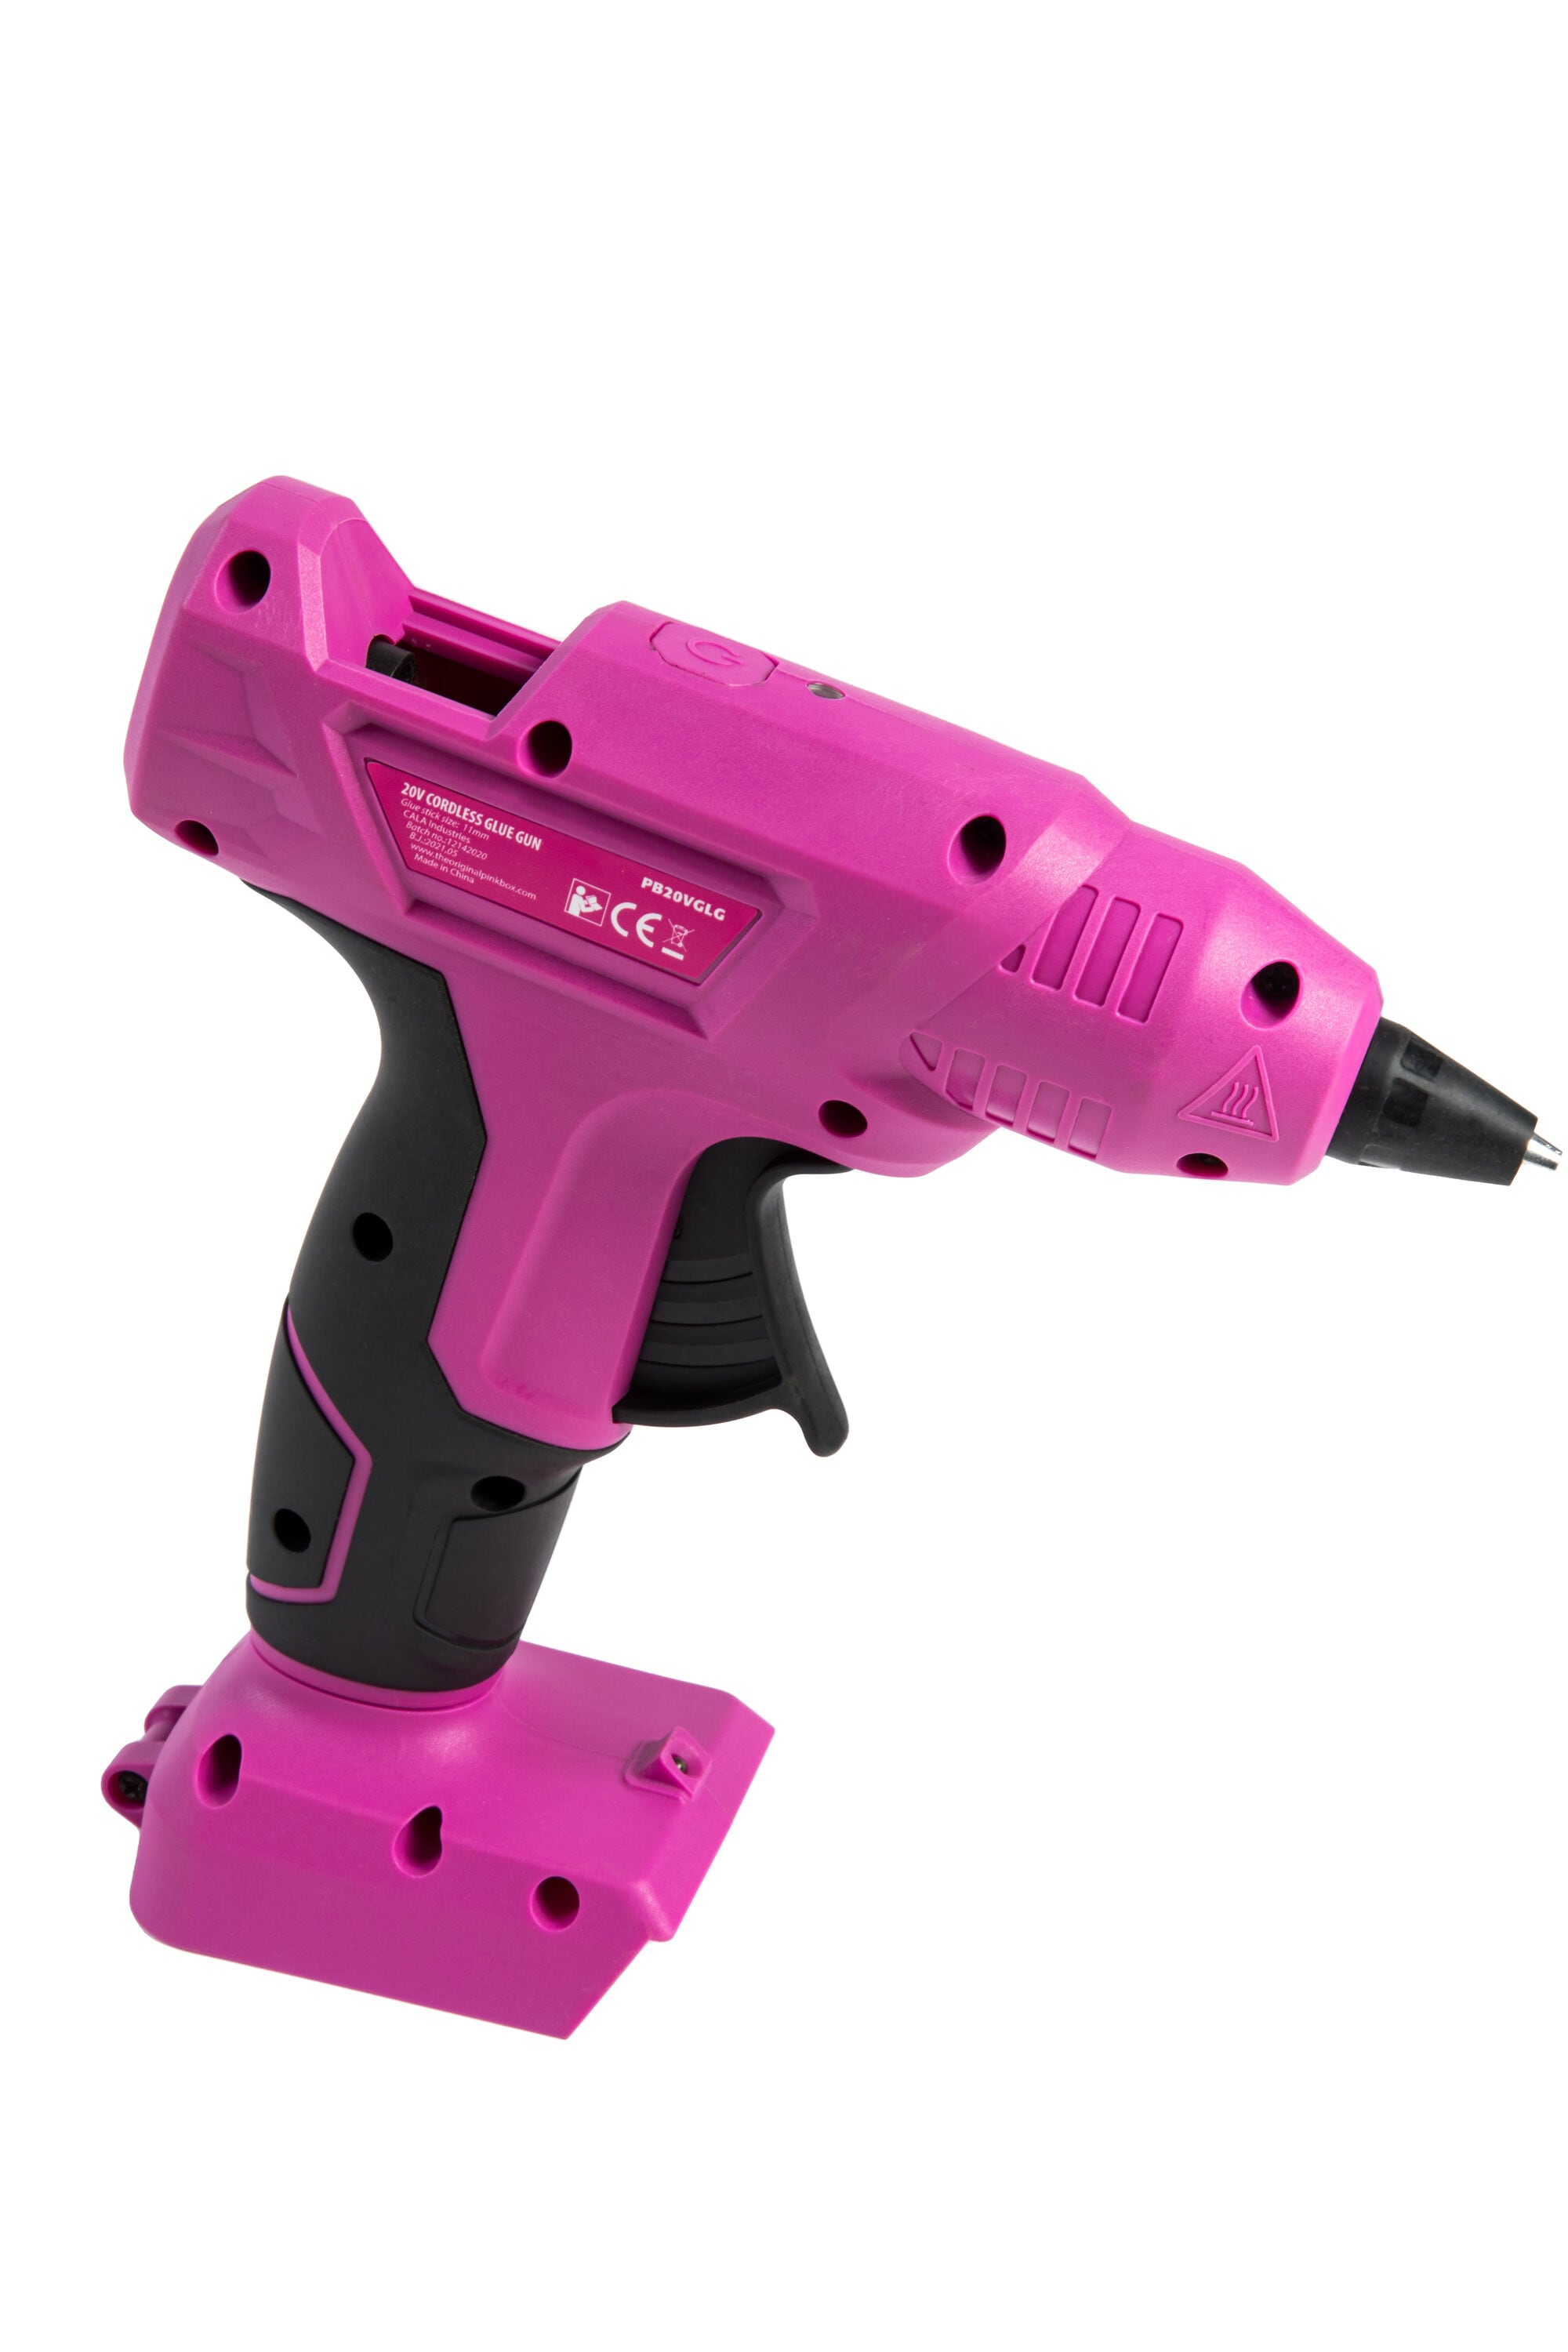 The Original Pink Box 26-in W x 16.75-in H 3-Drawer Steel Tool